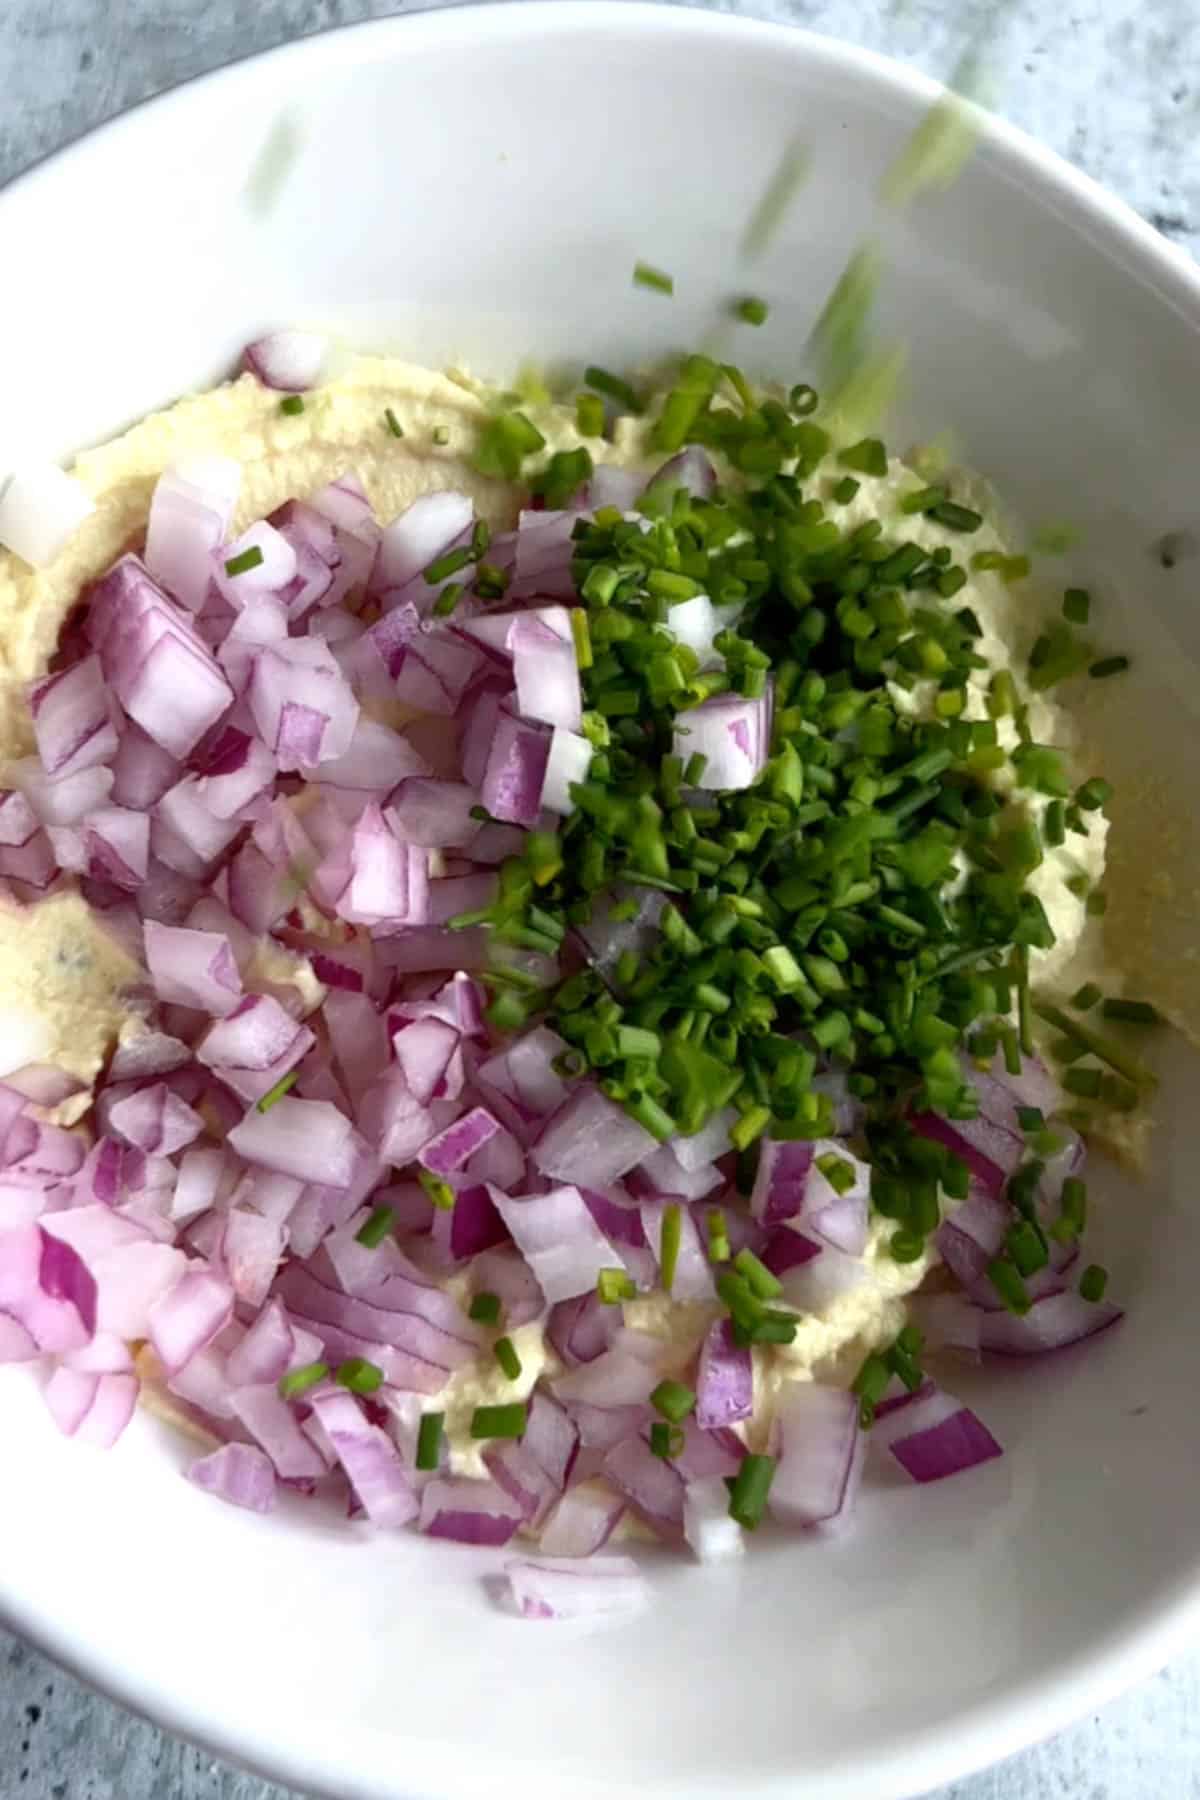 Vegan cream cheese, red onion, and chives in a white bowl.